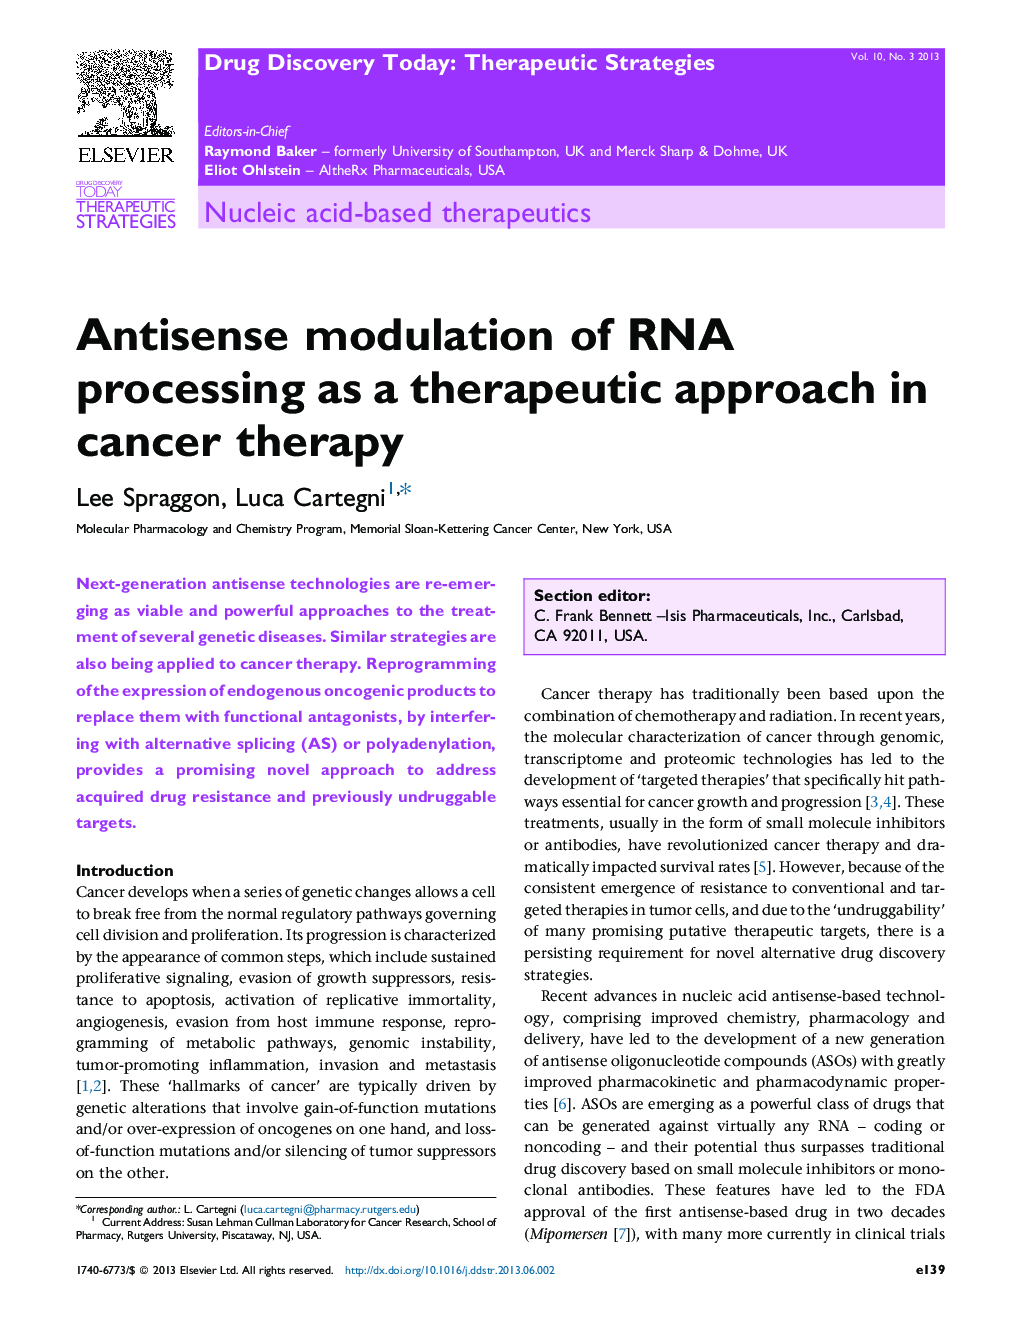 Antisense modulation of RNA processing as a therapeutic approach in cancer therapy